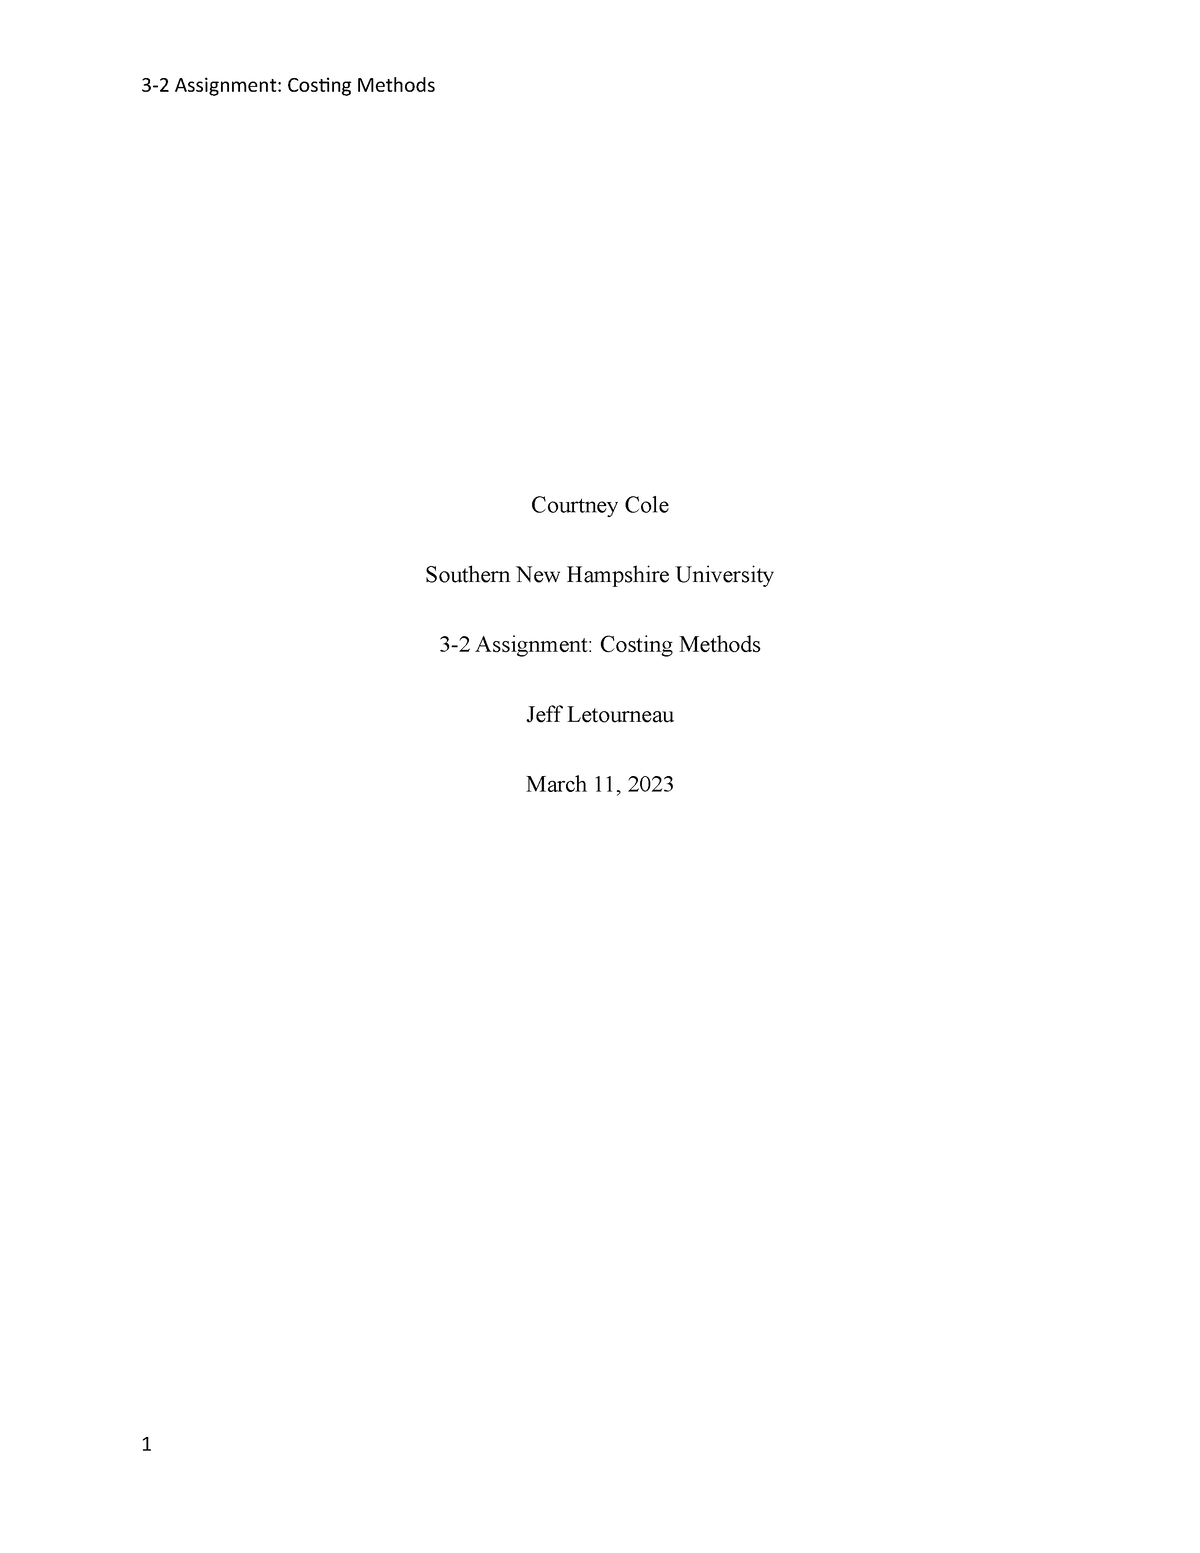 3-2 Assignment Costing Methods - Courtney Cole Southern New Hampshire ...